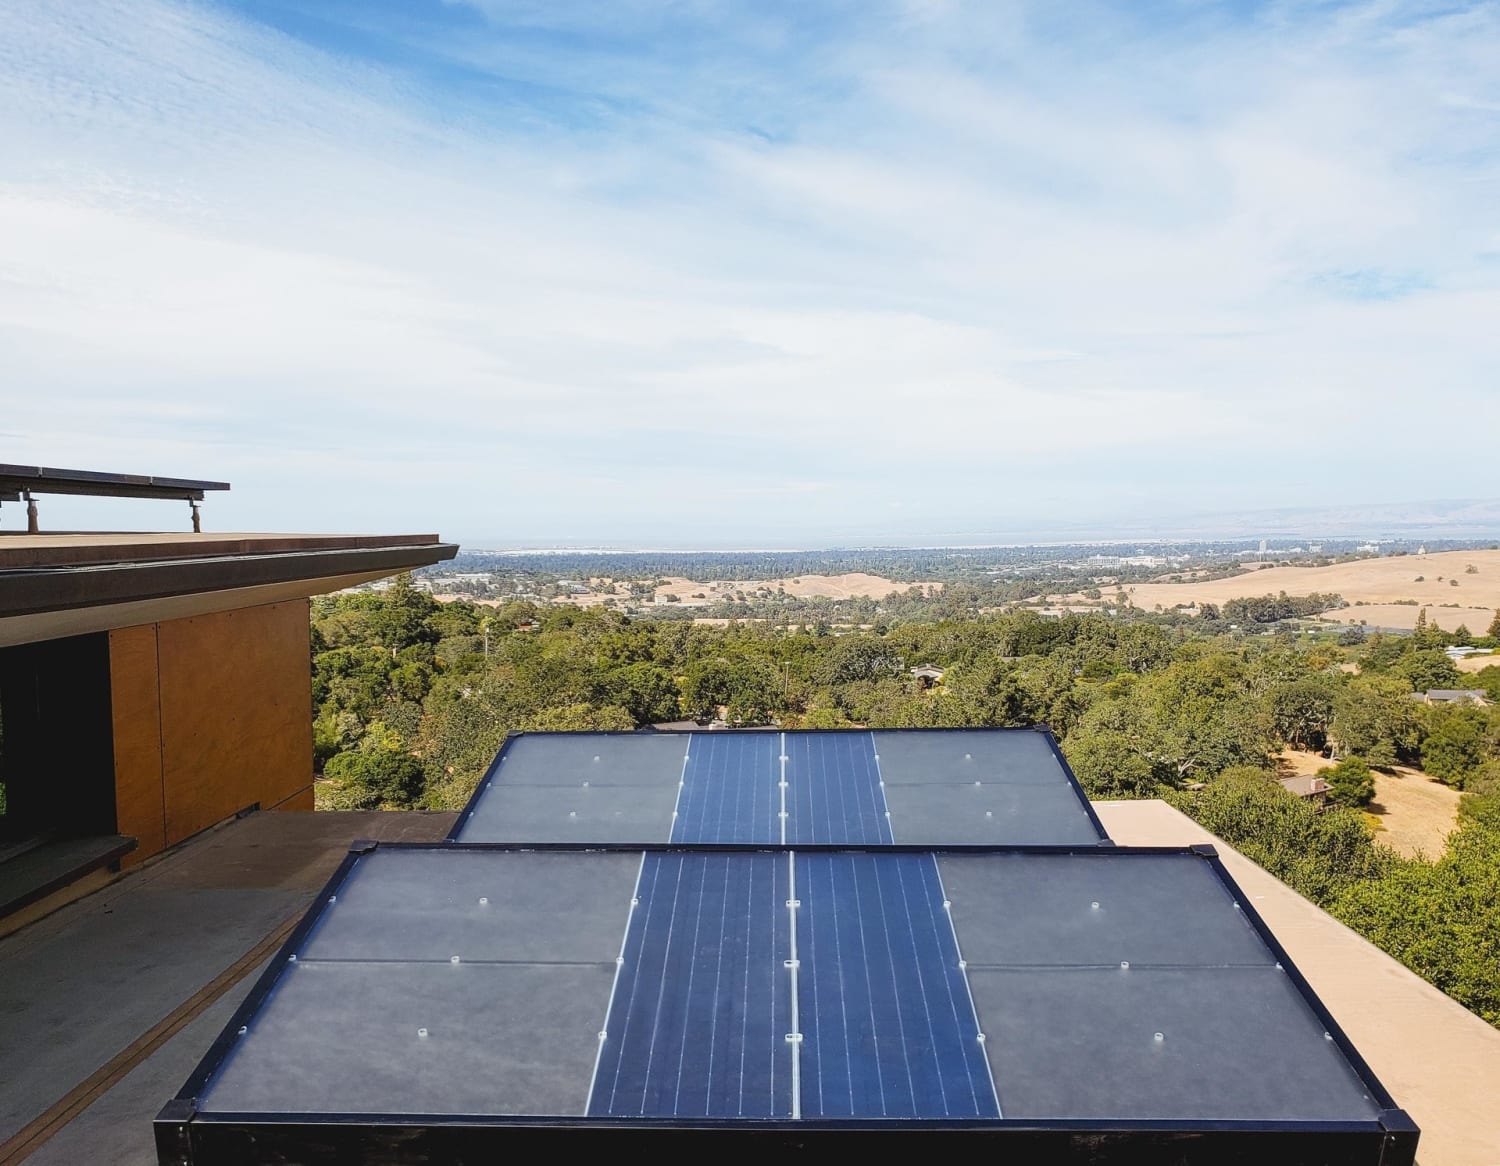 These solar panels pull clean drinking water from the air